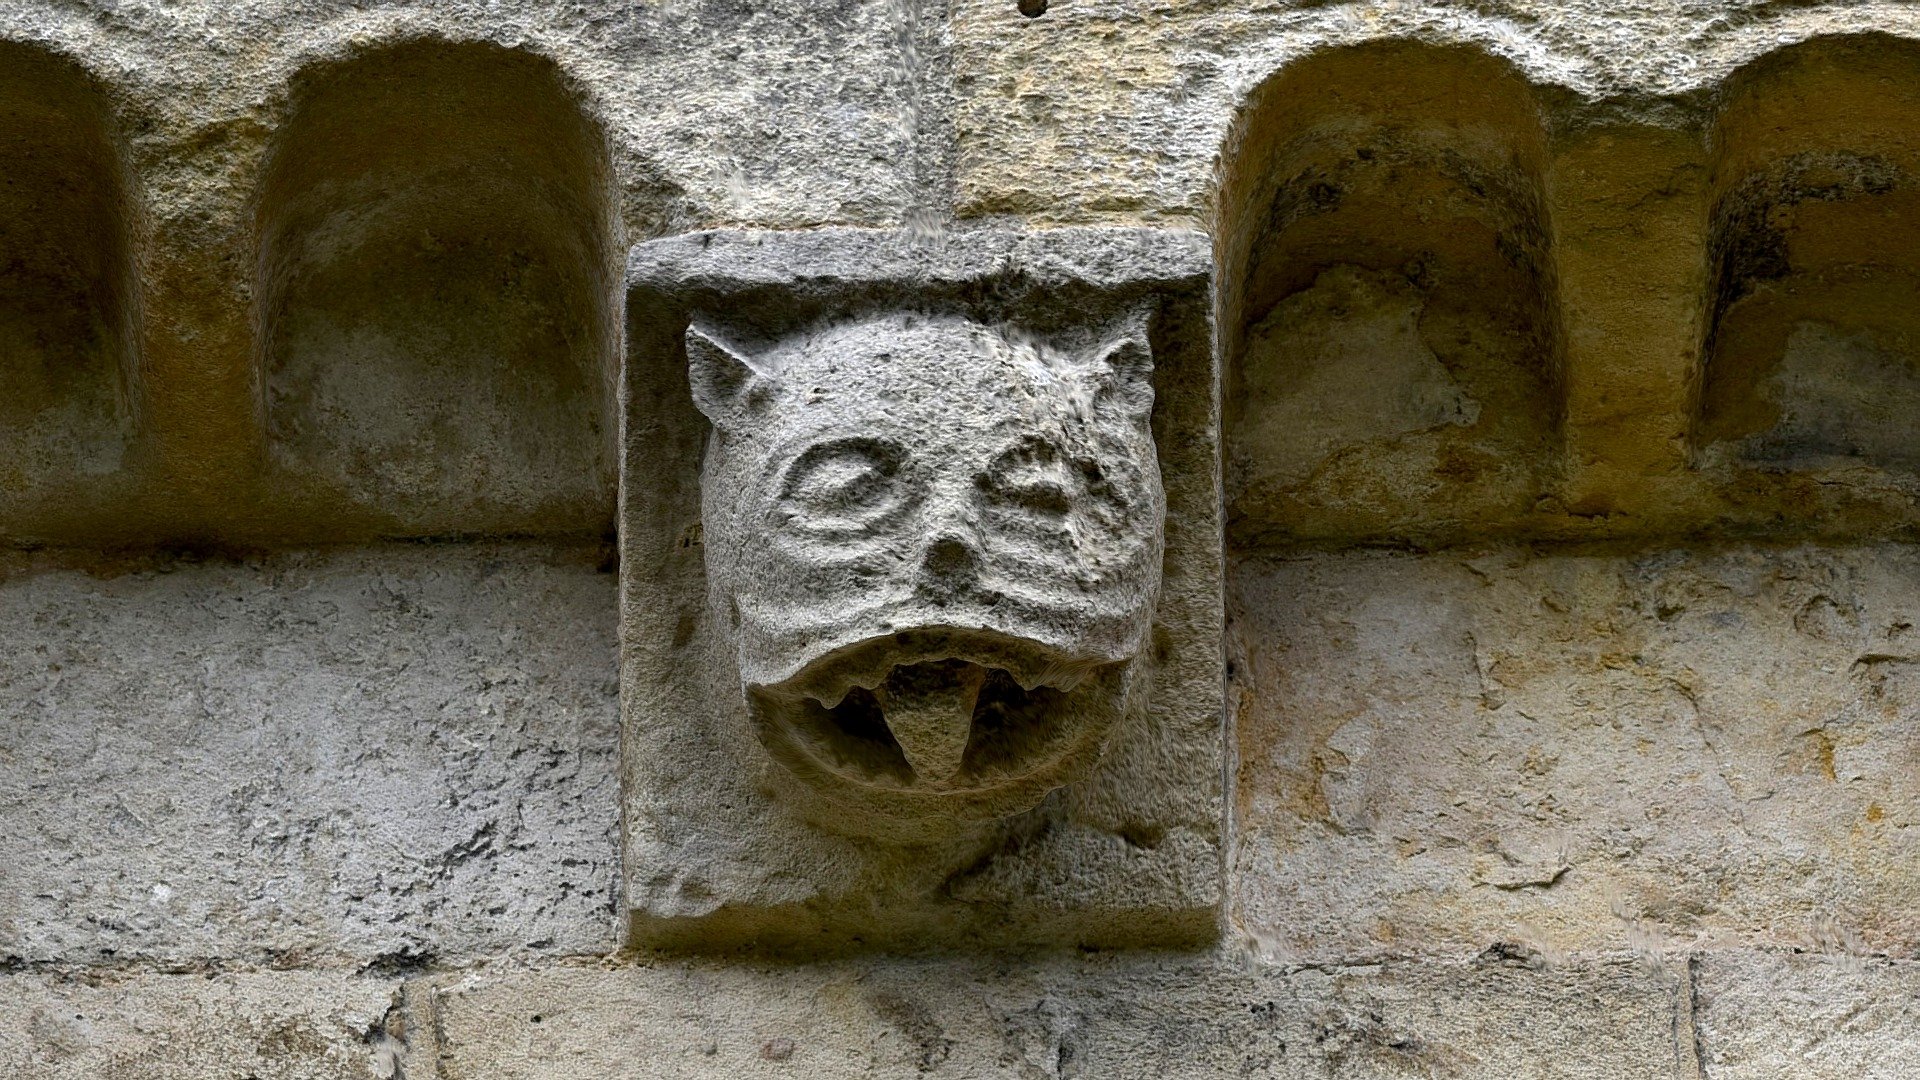 Medieval feline head installed on a corbel along the lower north level of Romsey Abbey, Romsey, Hampshire. The architecture of the medievel abbey is adorned with at least 400 decoratively carved stone corbels and grotesques.

Photographs taken June 2019 3d model